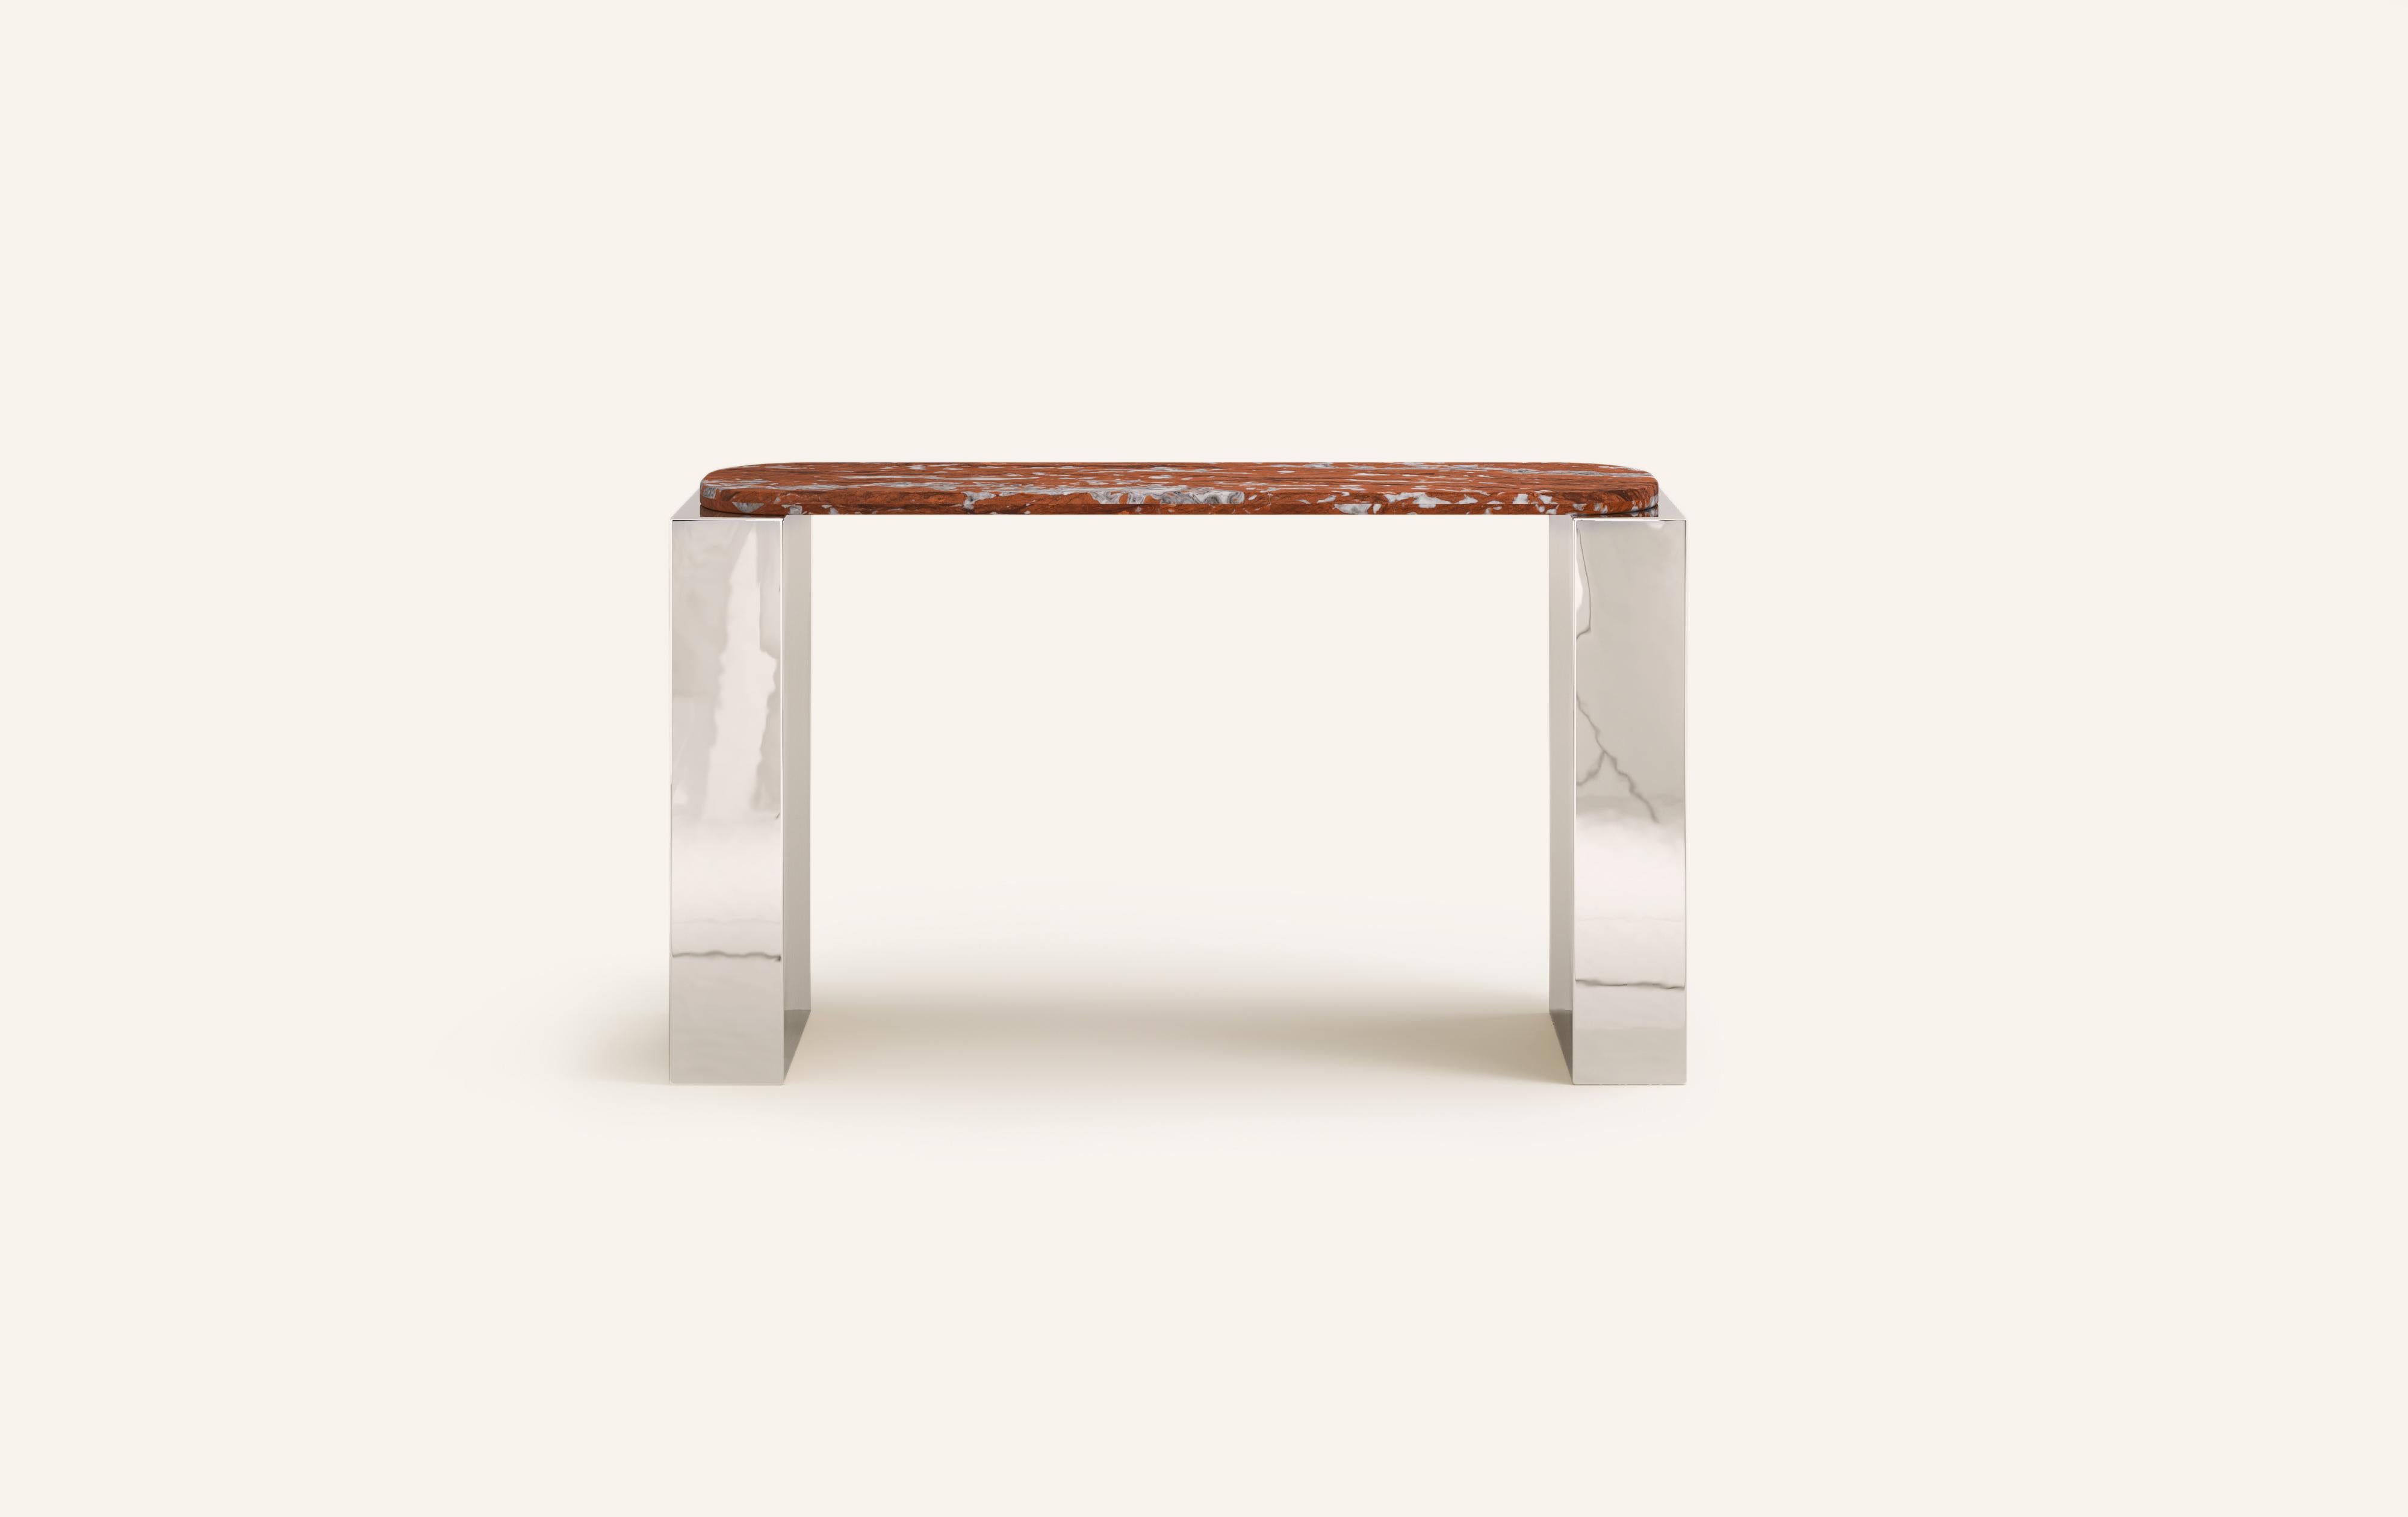 MONOLITHIC FORMS SOFTENED BY GENTLE EDGES. WITH ITS BOLD MARBLE PATTERNS CUBO IS AS VERSATILE AS IT IS STRIKING.

DIMENSIONS:
74”L x 17”W x 36”H: 
- 72”L x 15”W x 1.5” THICK TABLETOP WITH WITH 6